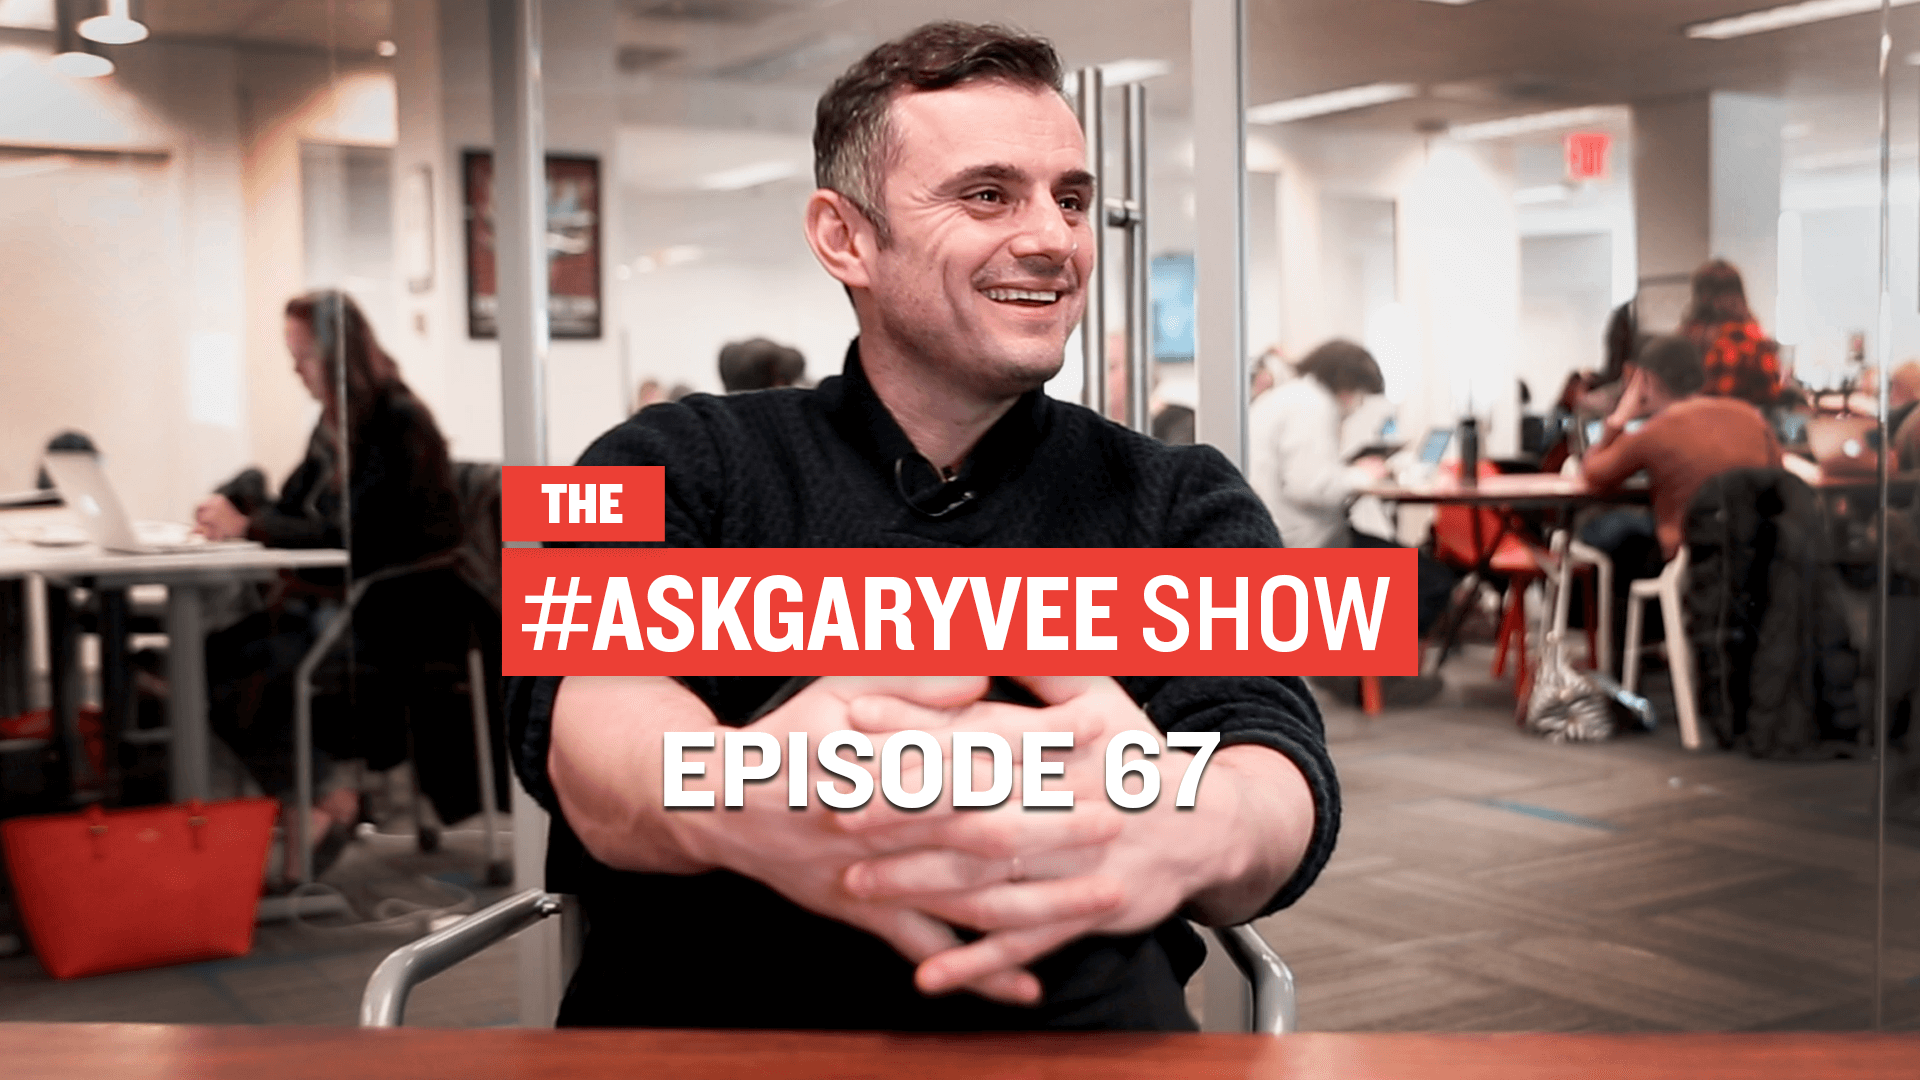 #AskGaryVee Episode 67: How to Fire an Employee, Wine Distribution Business, Managing Social Media